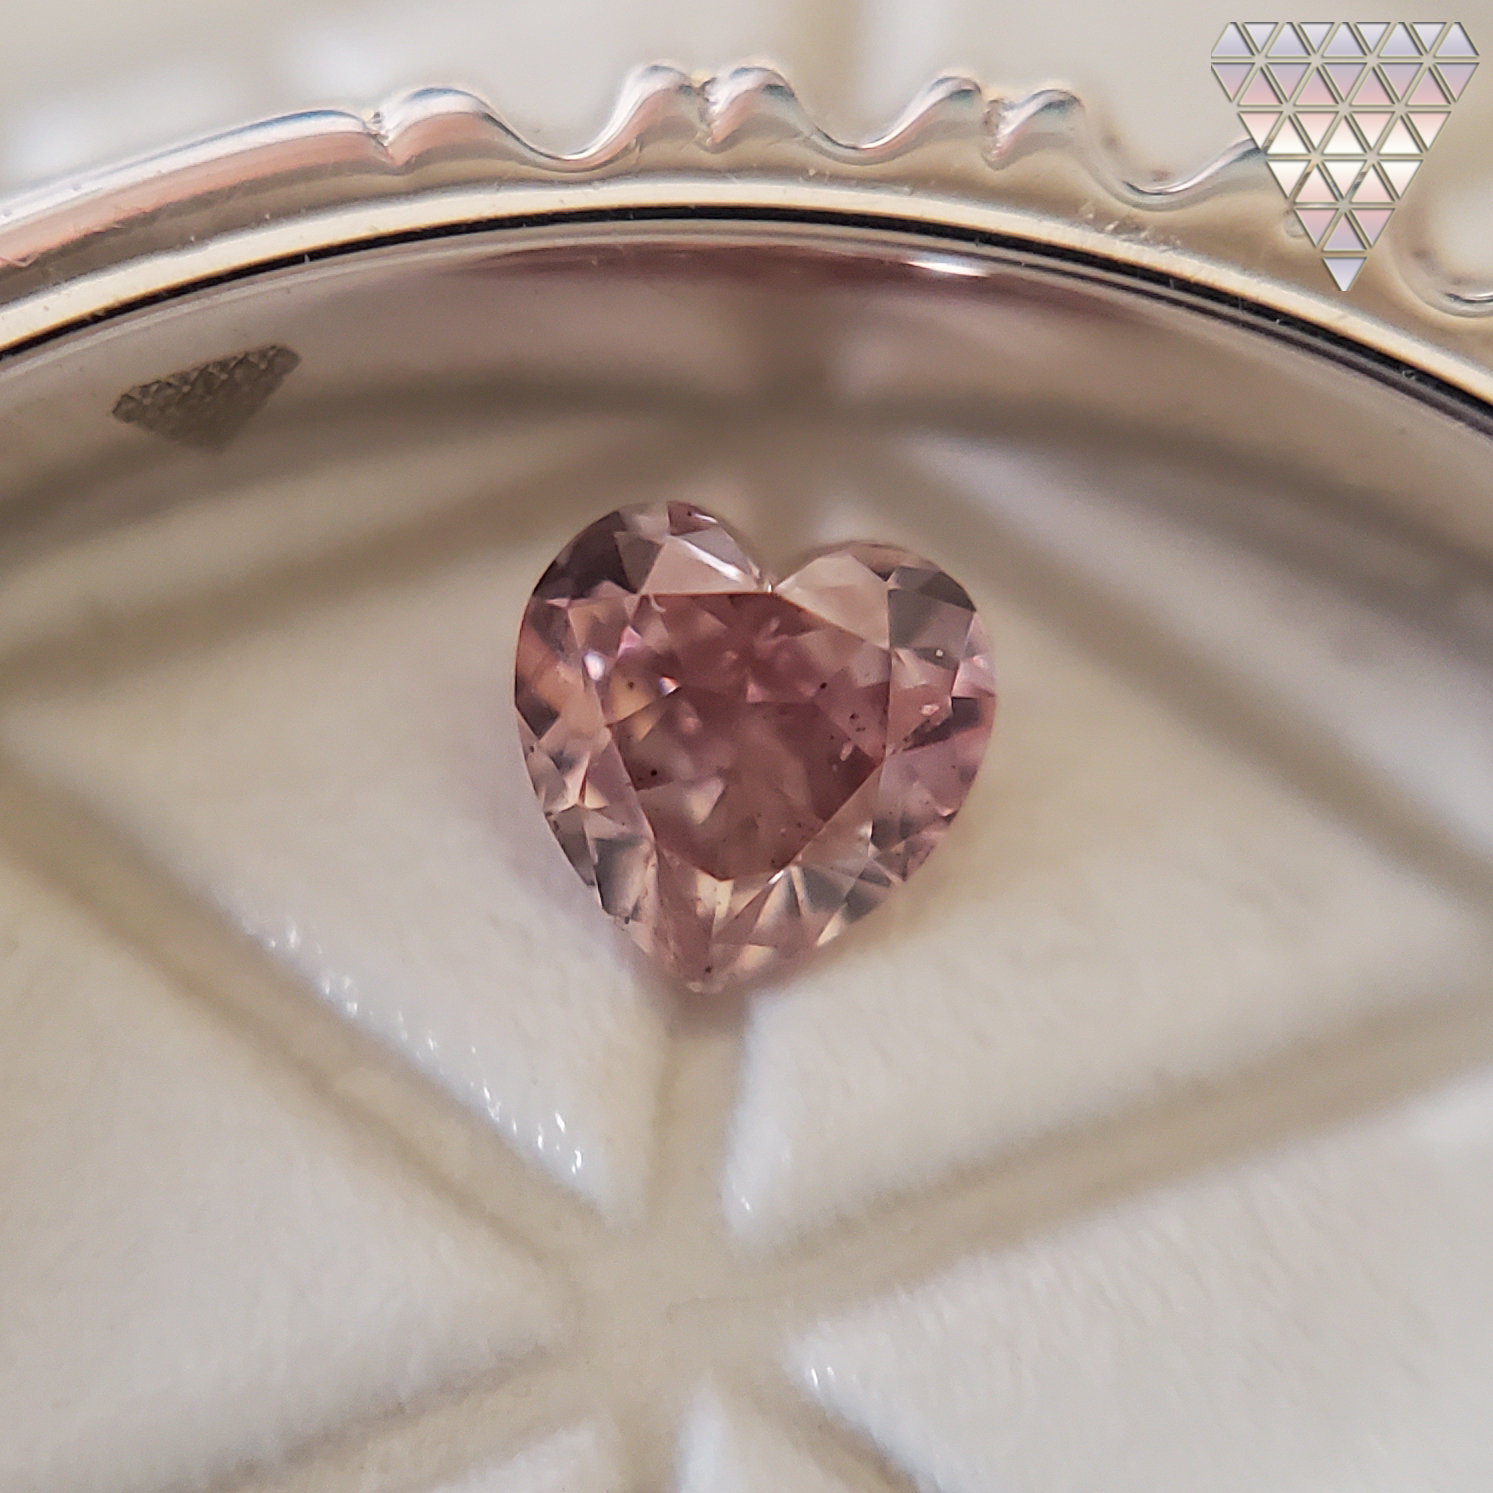 0.093 Ct Fancy Pink Si1 Heart AGT Japan Natural Loose Diamond Exchange Federation 9